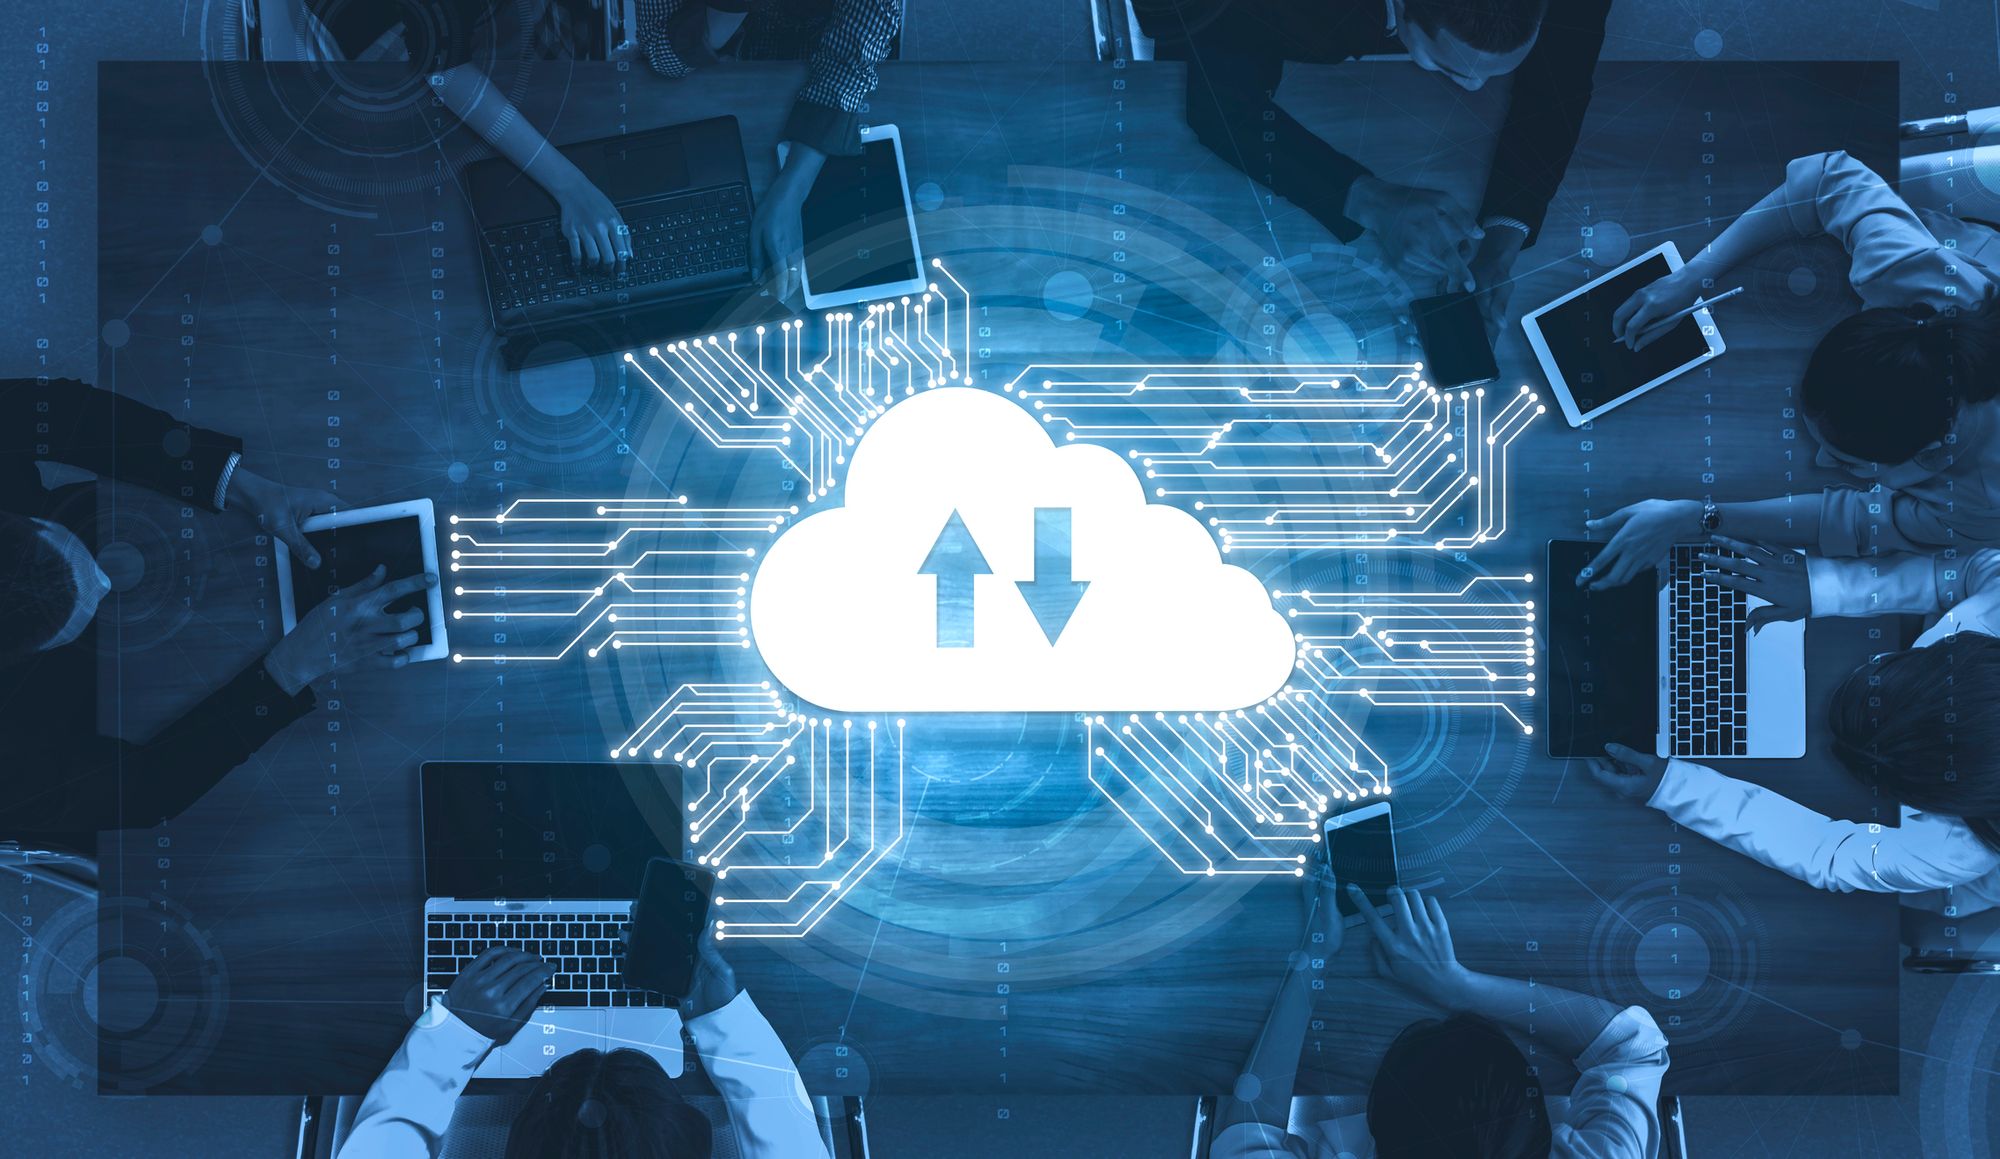 What It Takes to Securely Scale Cloud Environments at Tech Companies Today